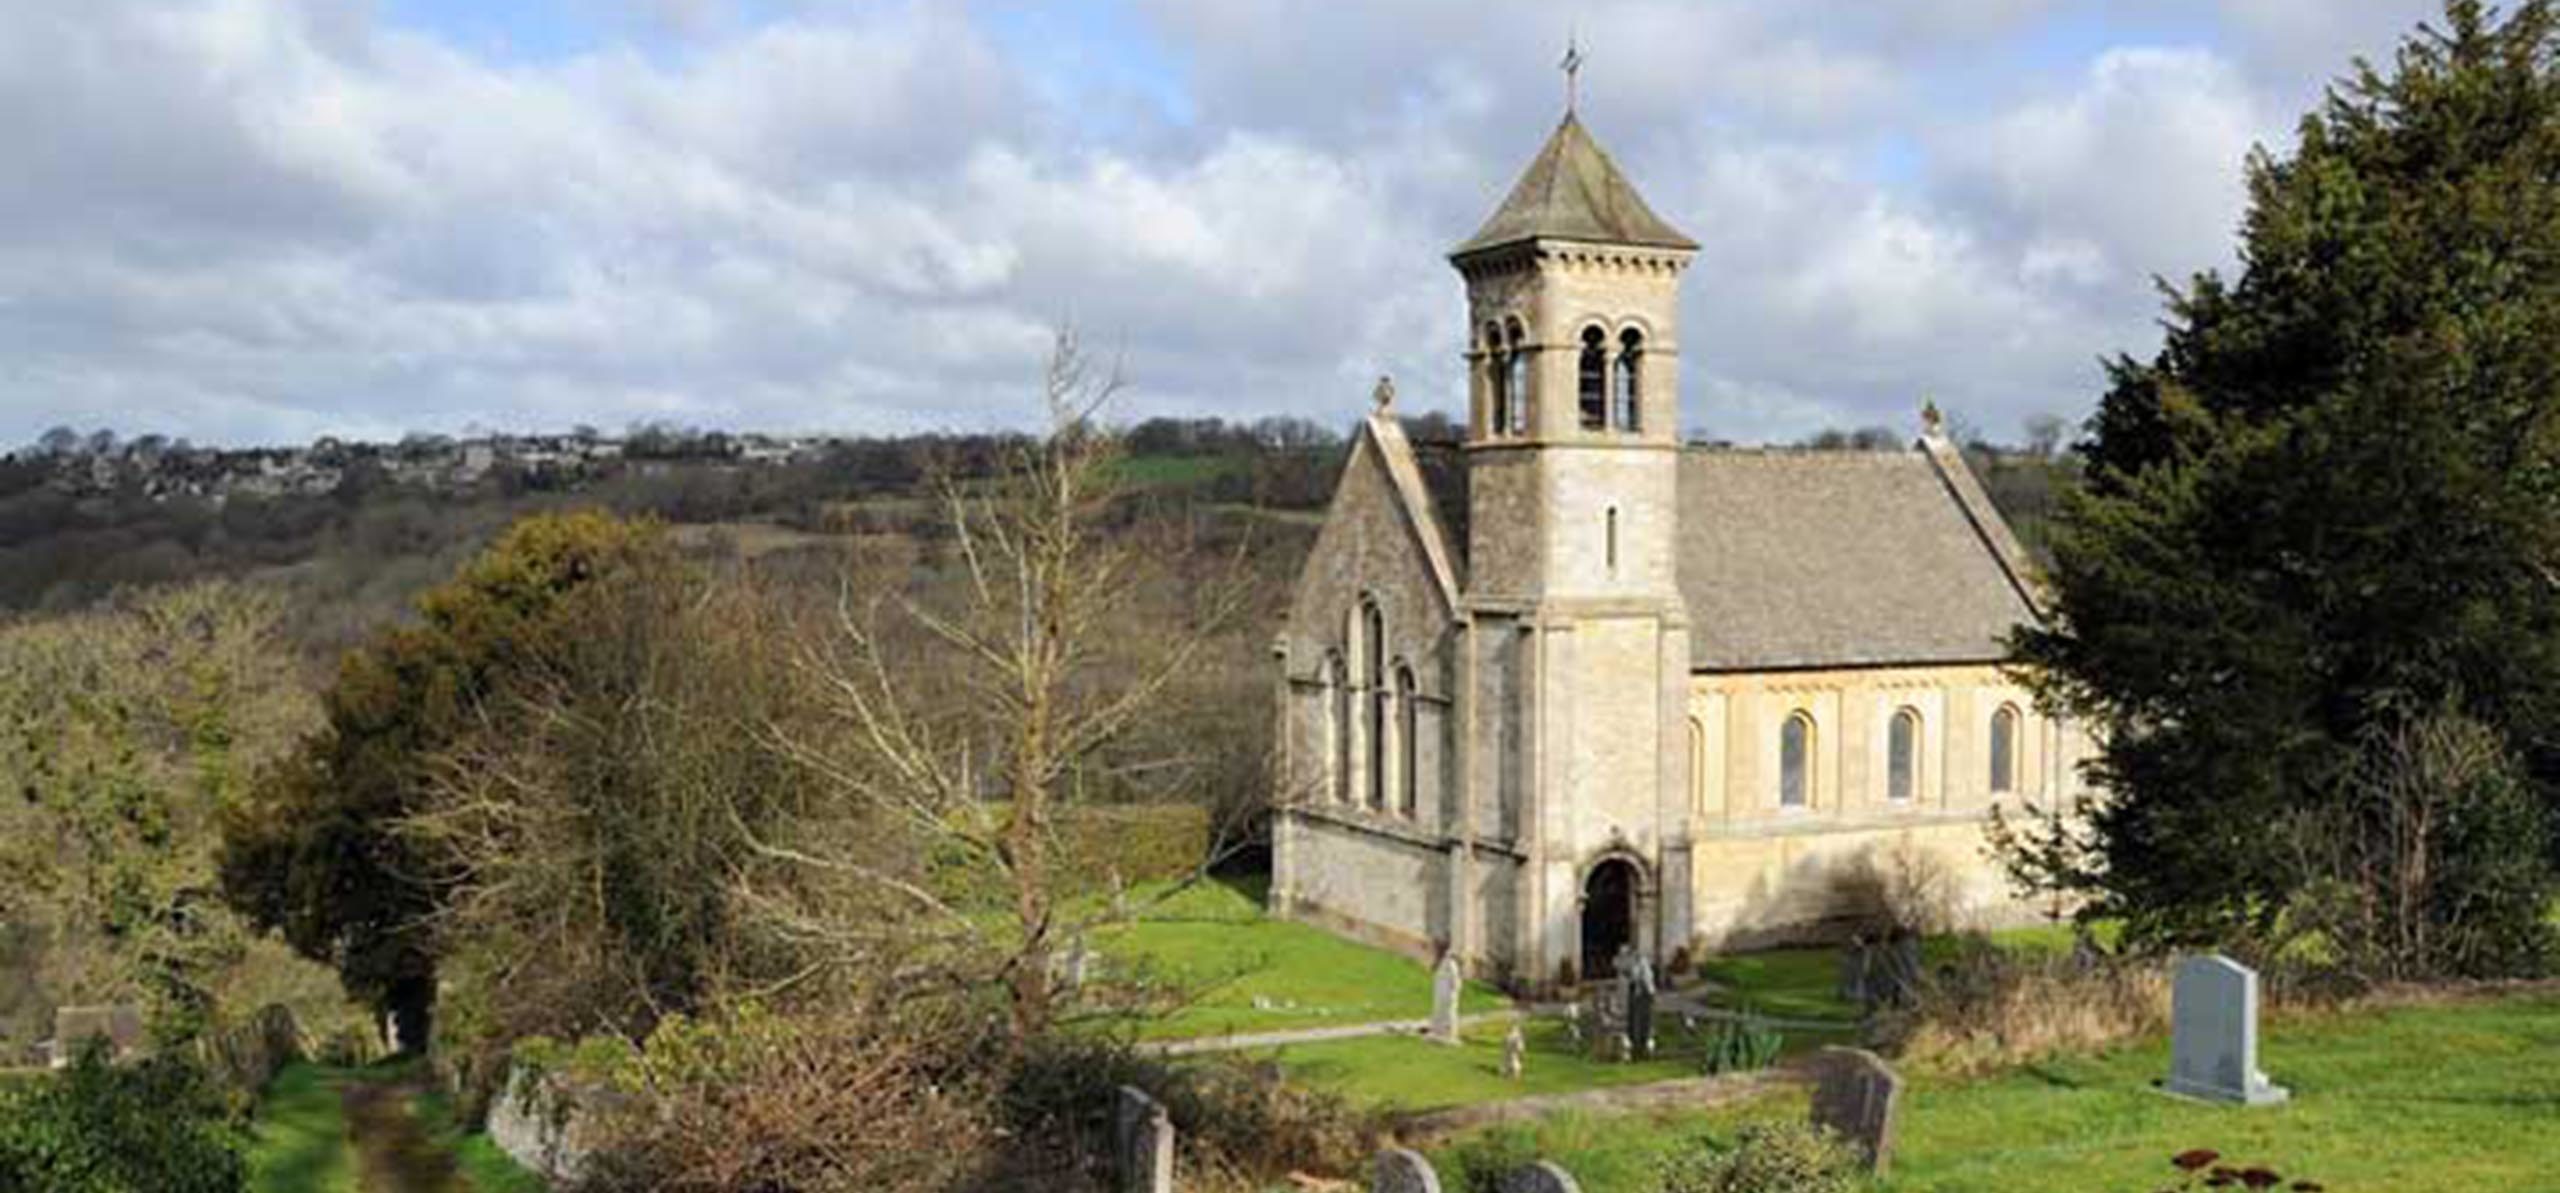 View of St Luke's Church in Frampton Mansell taken from the road above